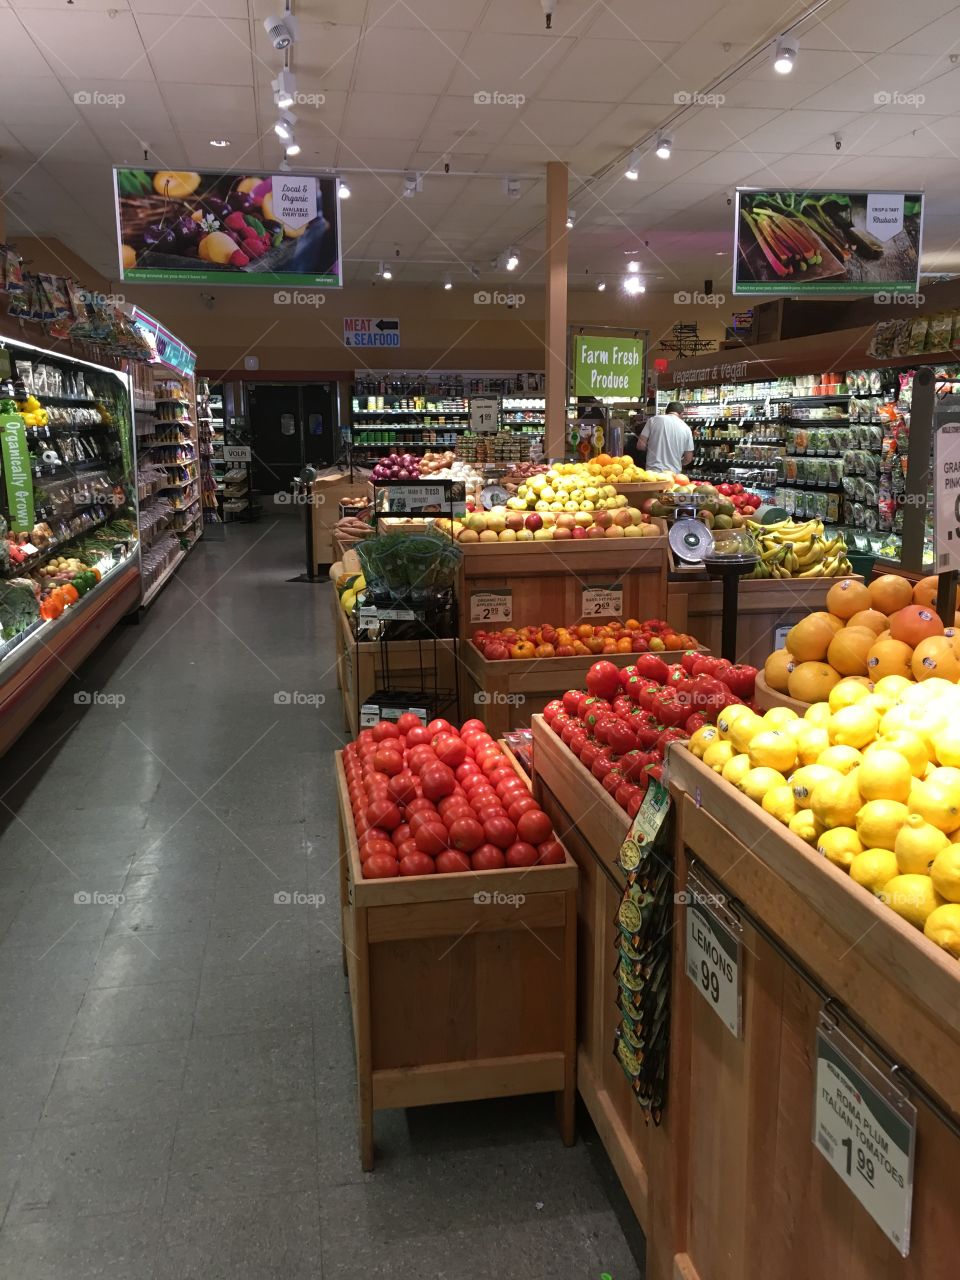 Grocery store Produce aisle 